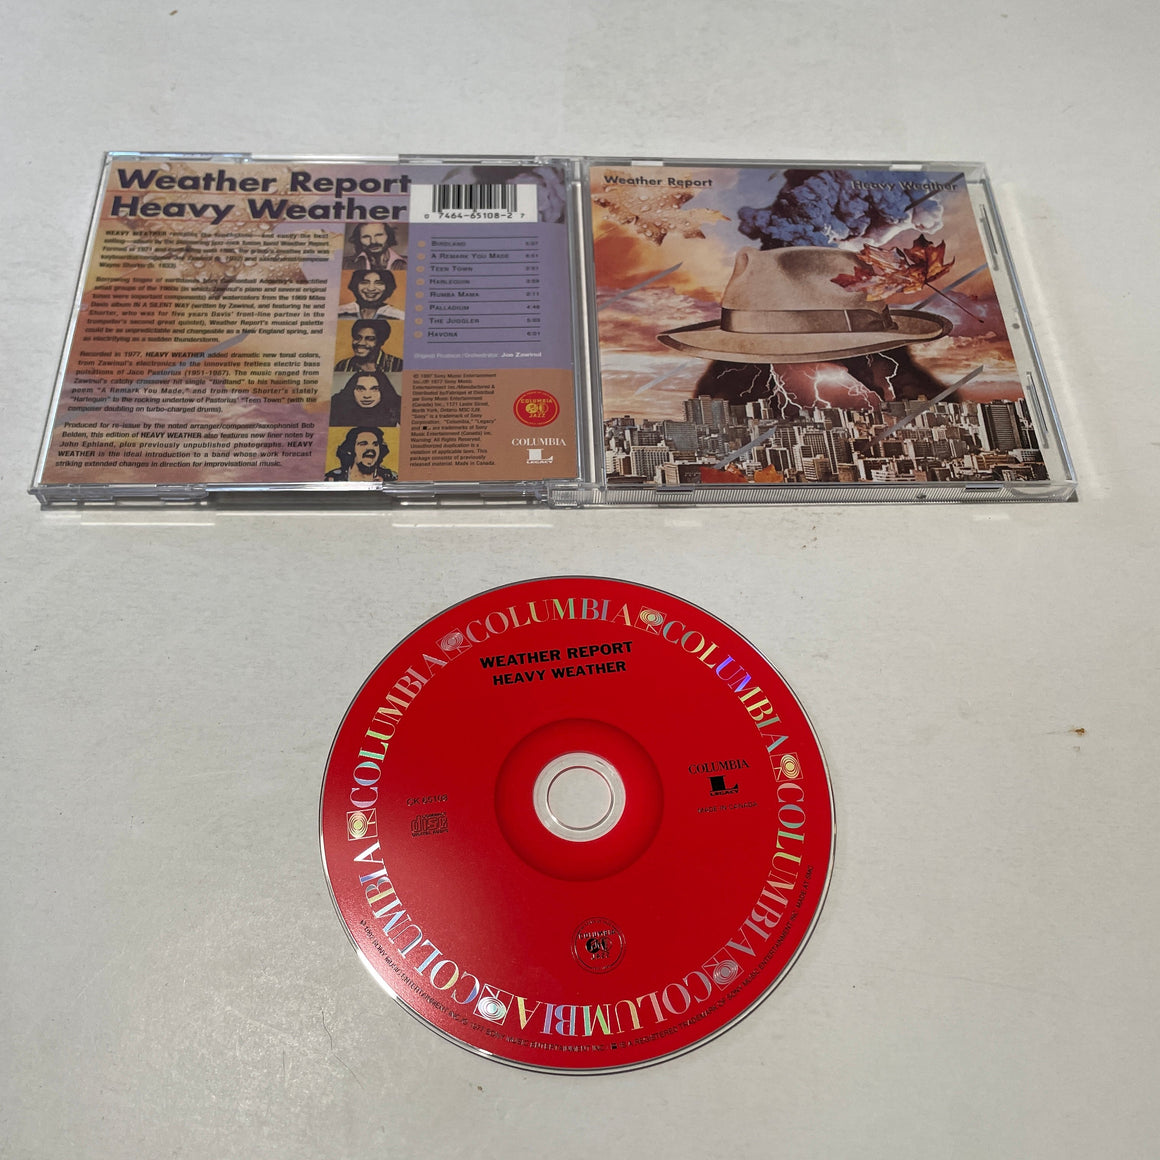 Weather Report Heavy Weather Used CD VG+\VG+